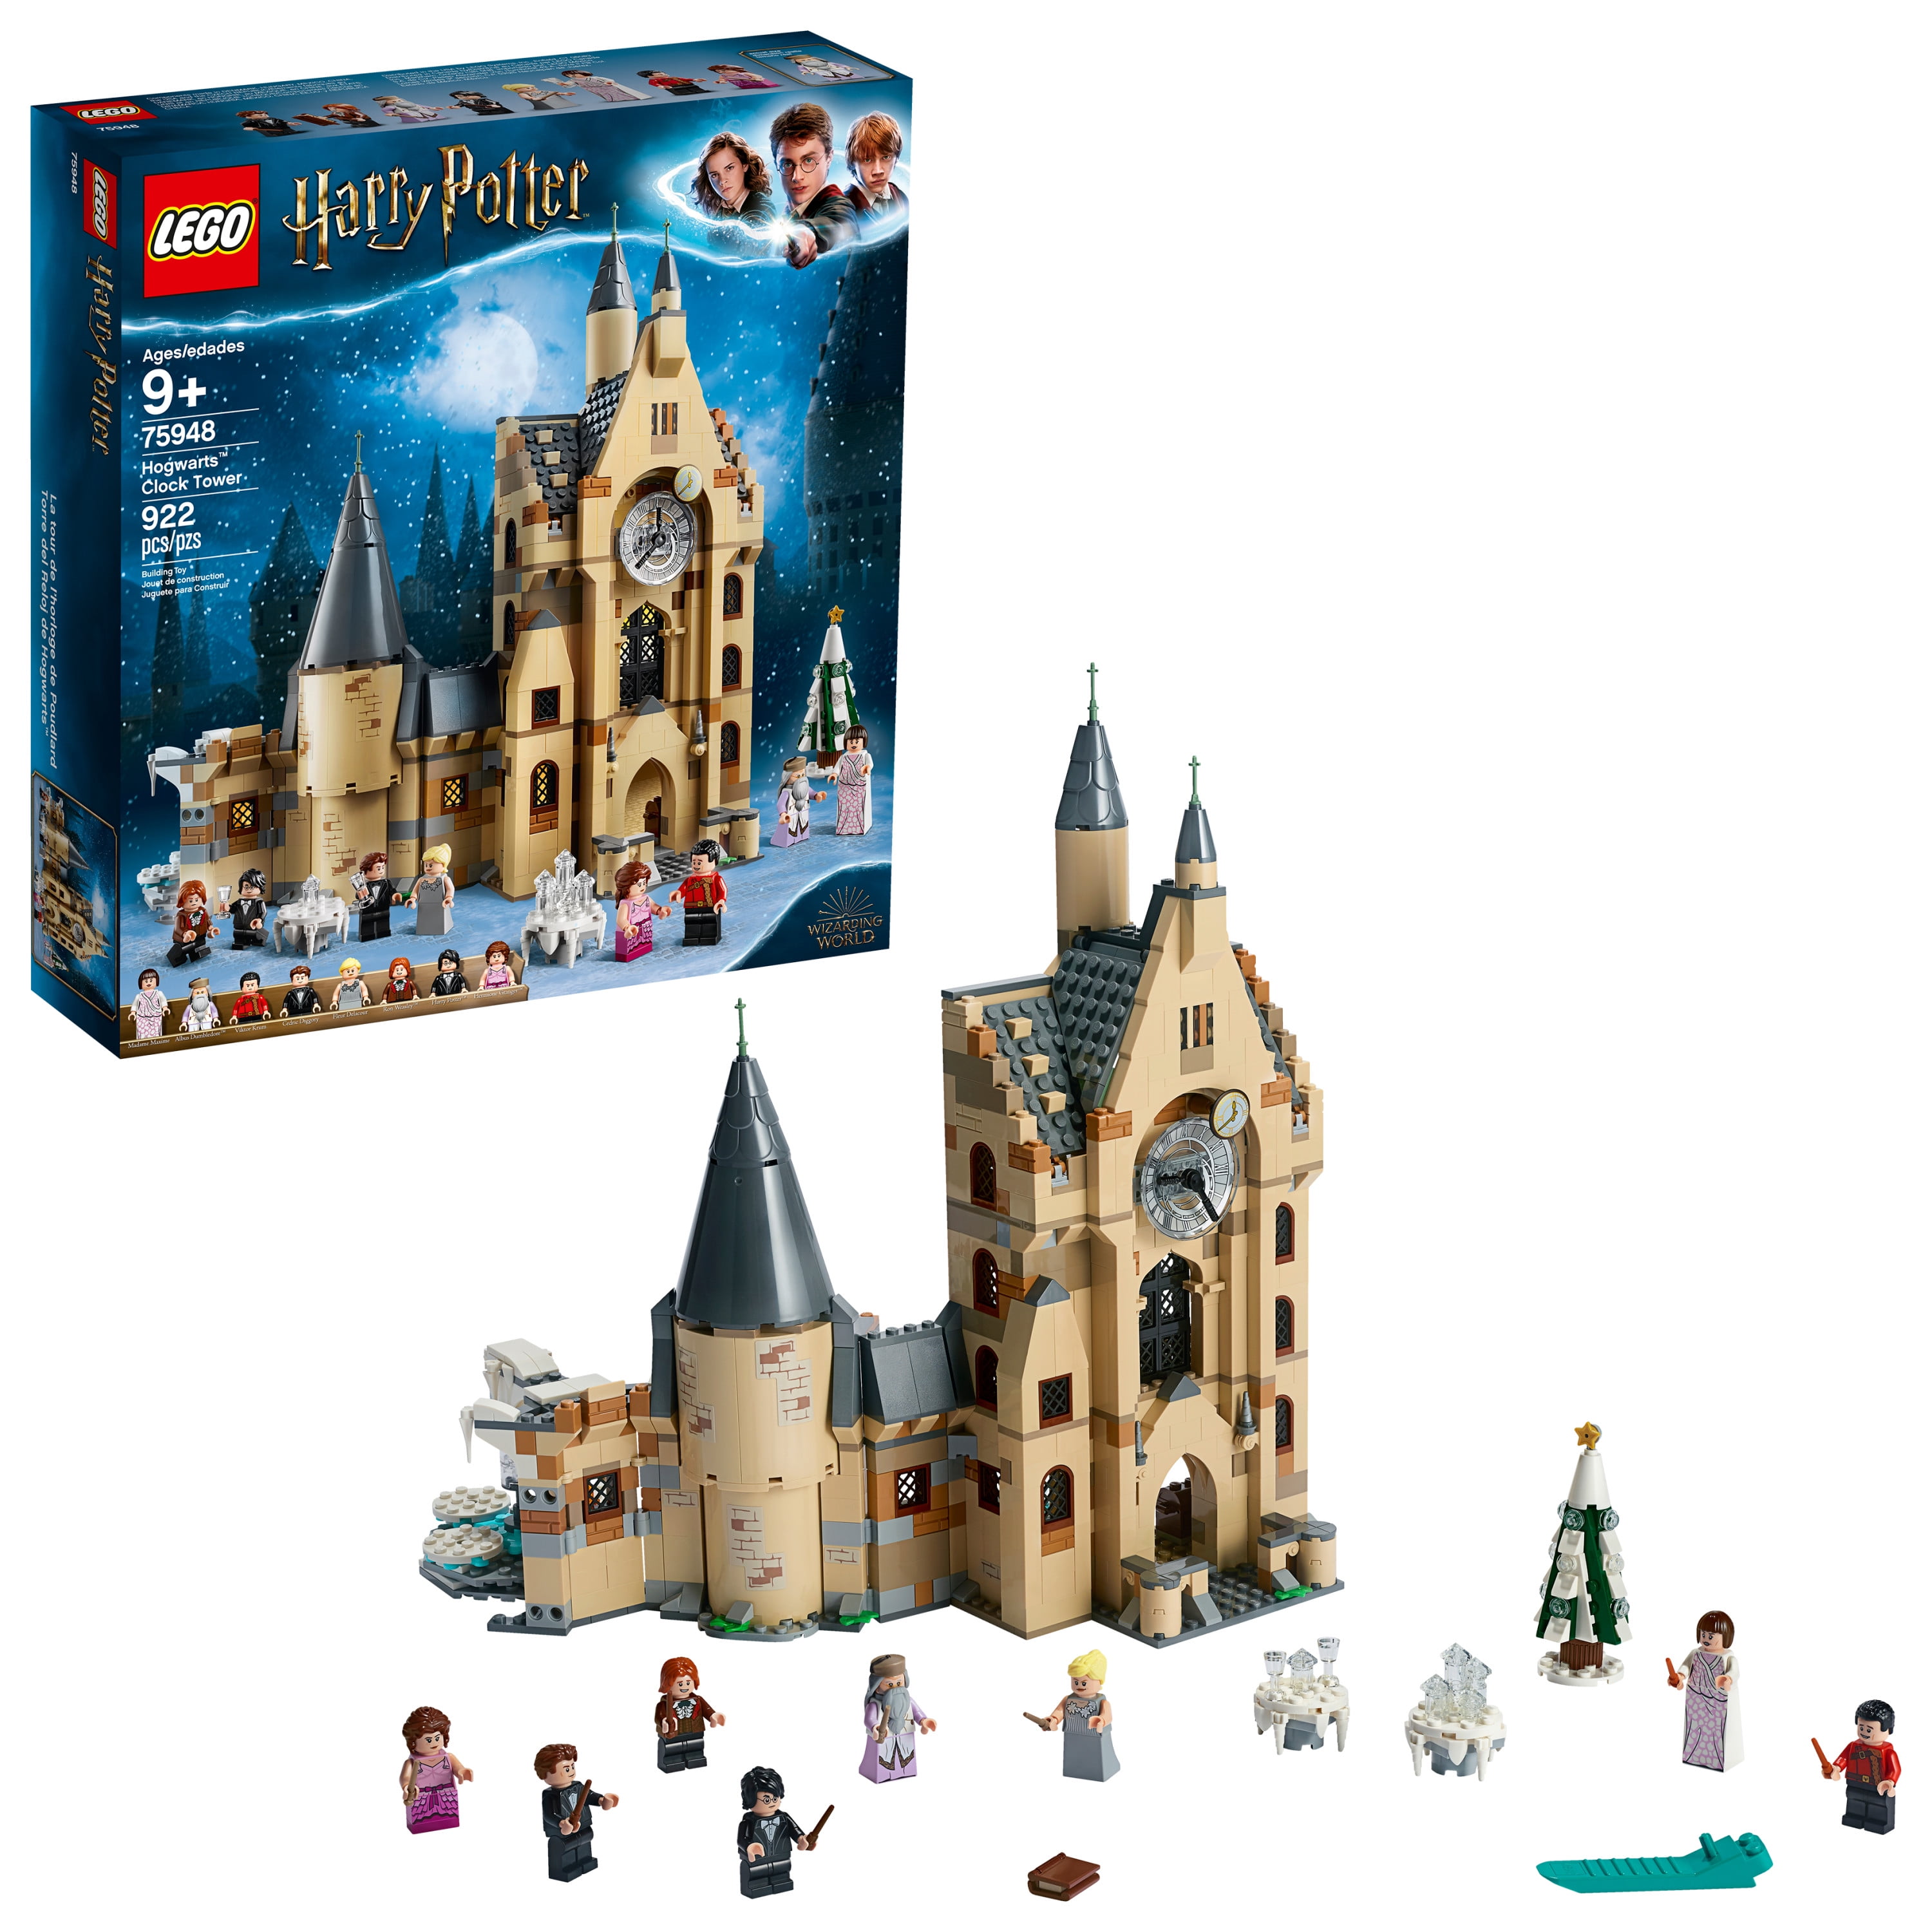 75953 Harry Potter Hogwarts Whomping Willow Castle Building Bricks Toy Age 8-14 